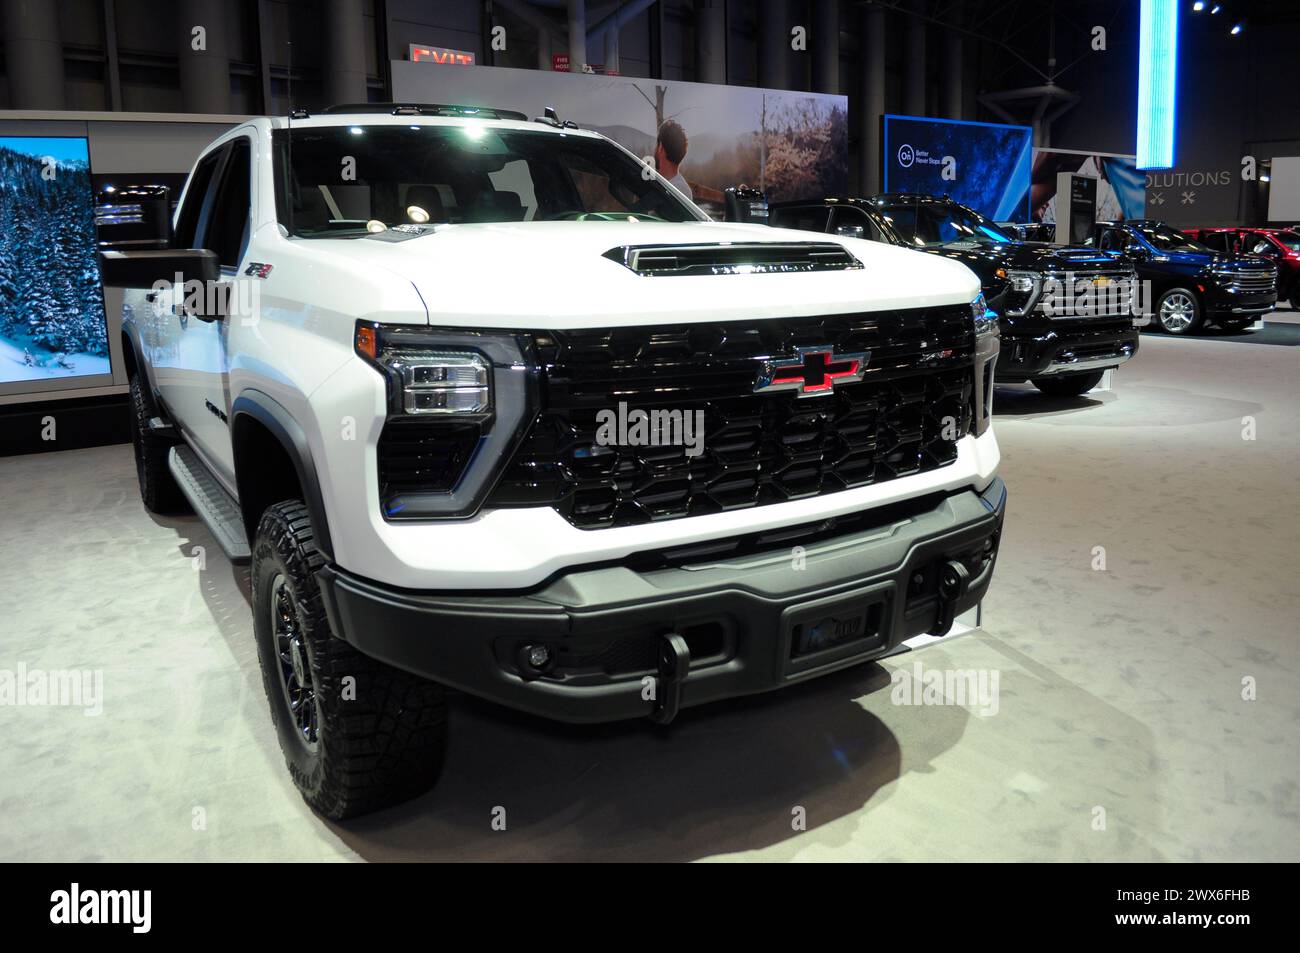 A 2024 Chevrolet Silverado HD ZR2 Bison vehicle is seen on the first media day at the 2024 New York International Auto Show in the Jacob K. Javits Convention Center. The annual NYIAS in Manhattan, New York City featured various car companies, debuts of new vehicles and automobile industry professionals. The show which opens to the public on March 29 and ends on April 7, attracts thousands of car enthusiasts. The NYIAS began in 1900 showcasing automobiles and examples of future car technology. (Photo by Jimin Kim/SOPA Images/Sipa USA) Stock Photo